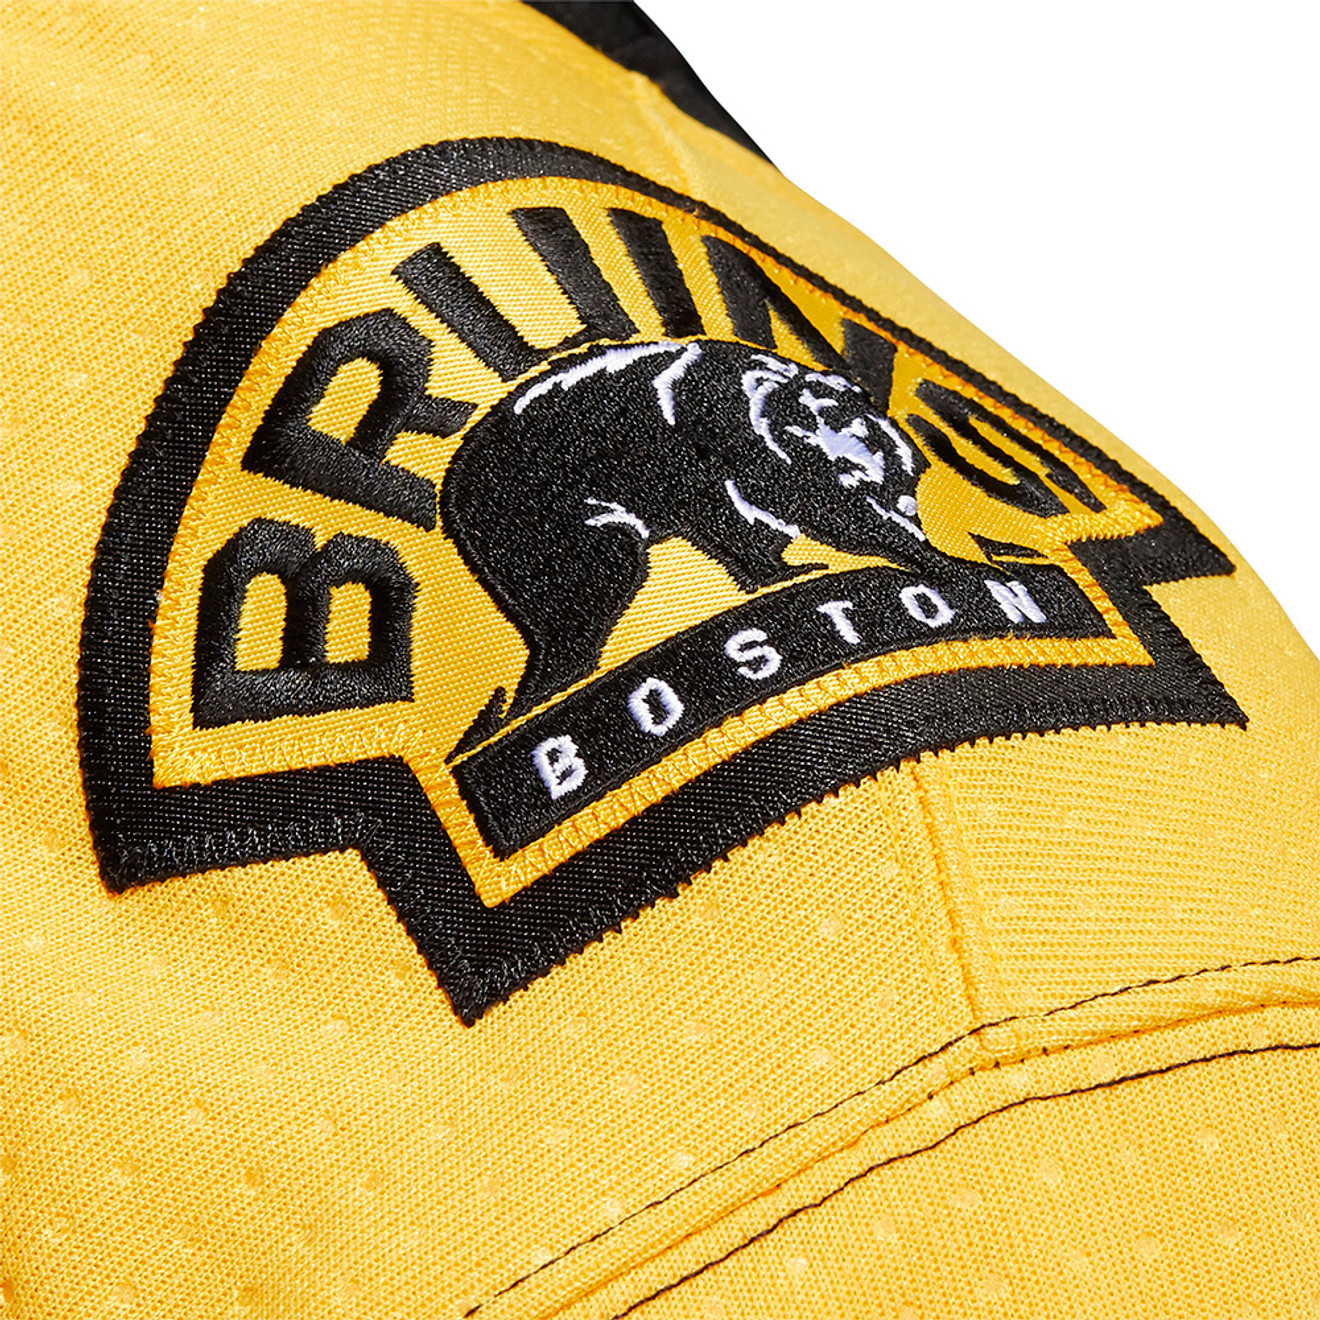 ANY NAME AND NUMBER BOSTON BRUINS HOME OR AWAY AUTHENTIC ADIDAS